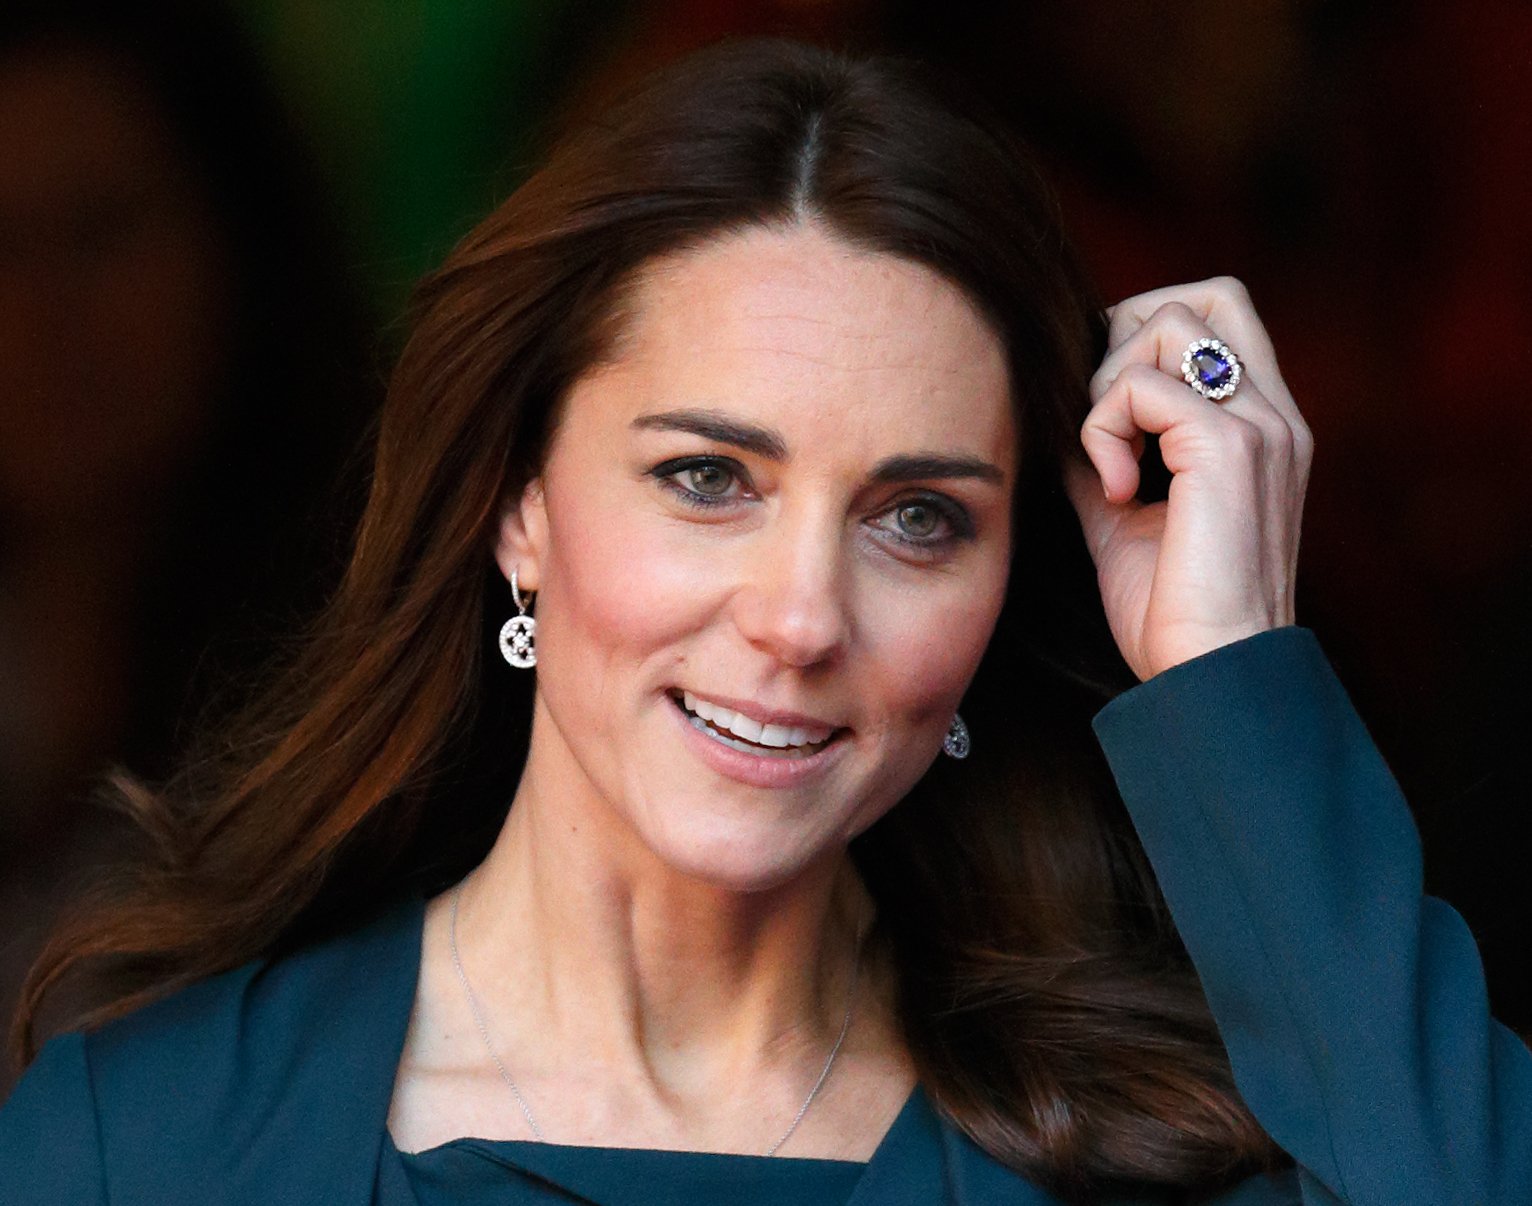 Photograph of Kate Middleton from the shoulders up poushing her hair out of her face